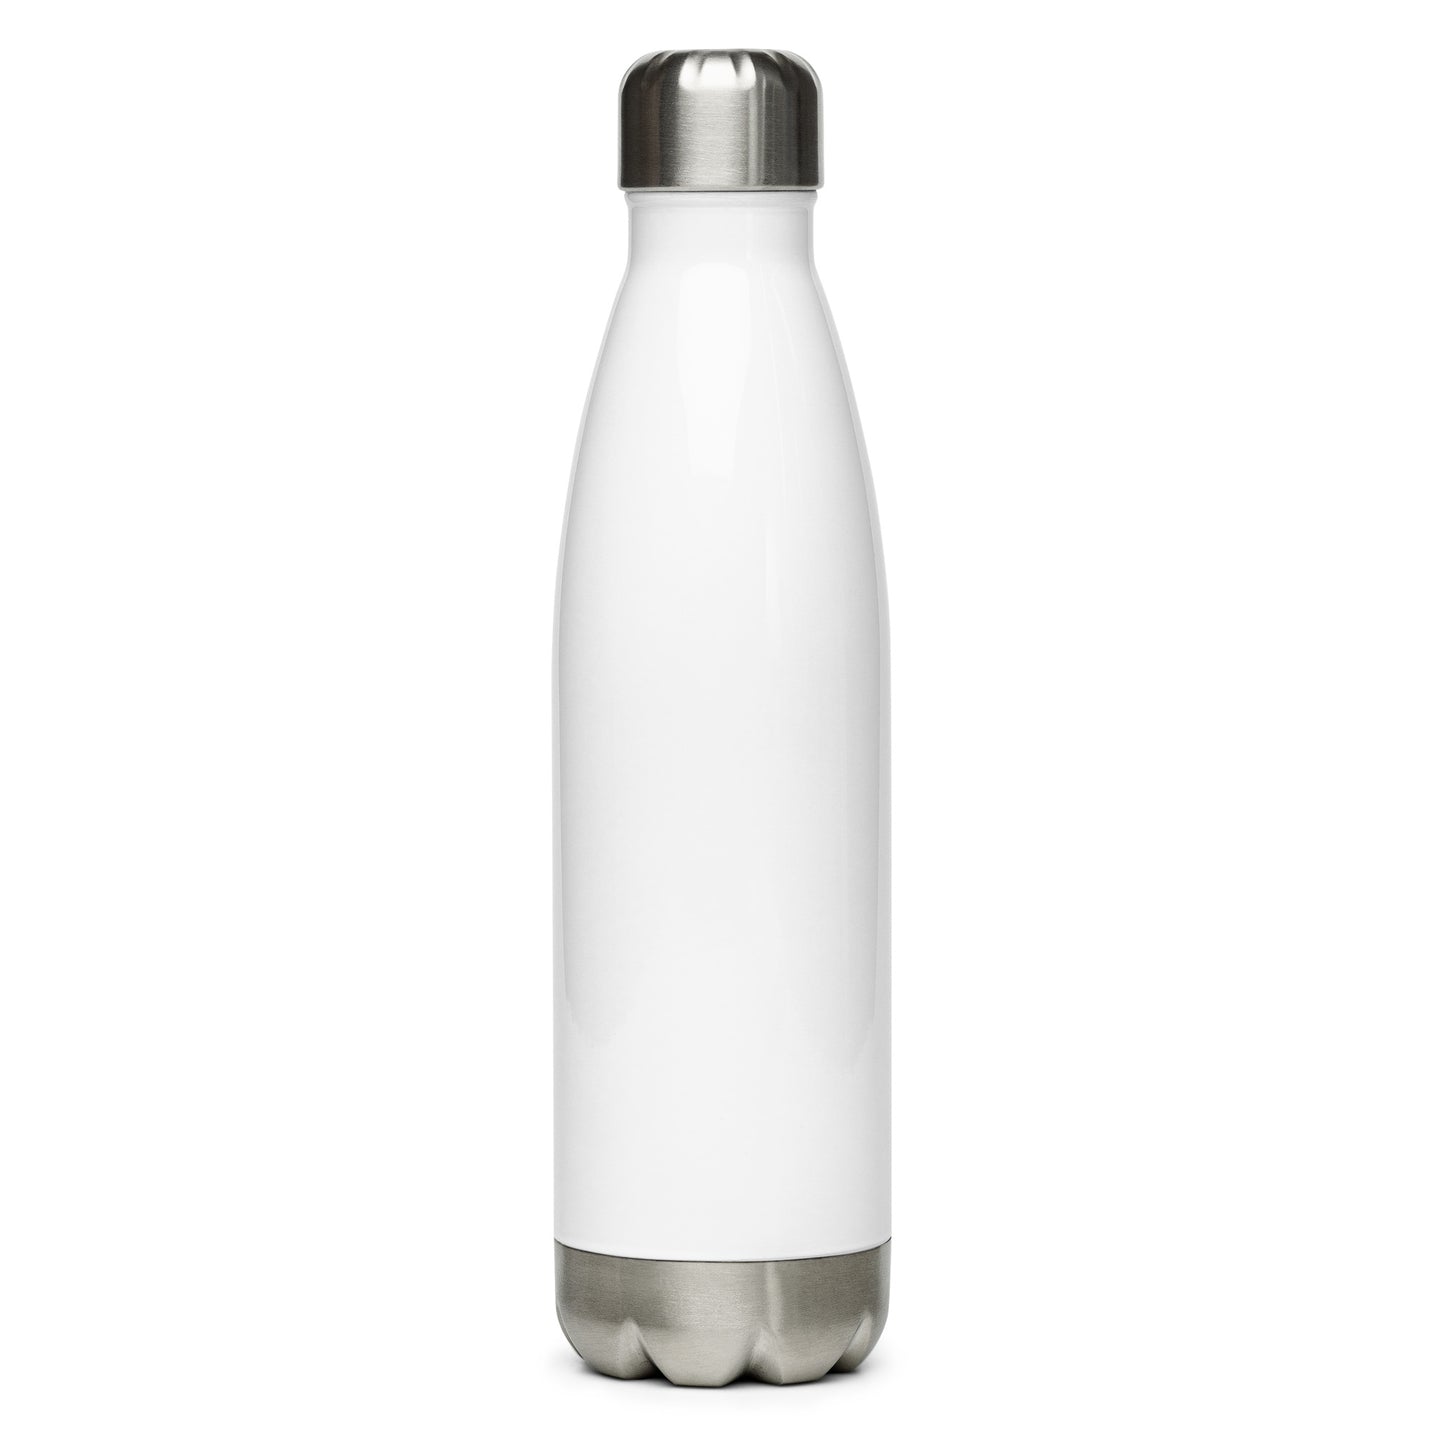 Shores of Okinawa Stainless steel water bottle